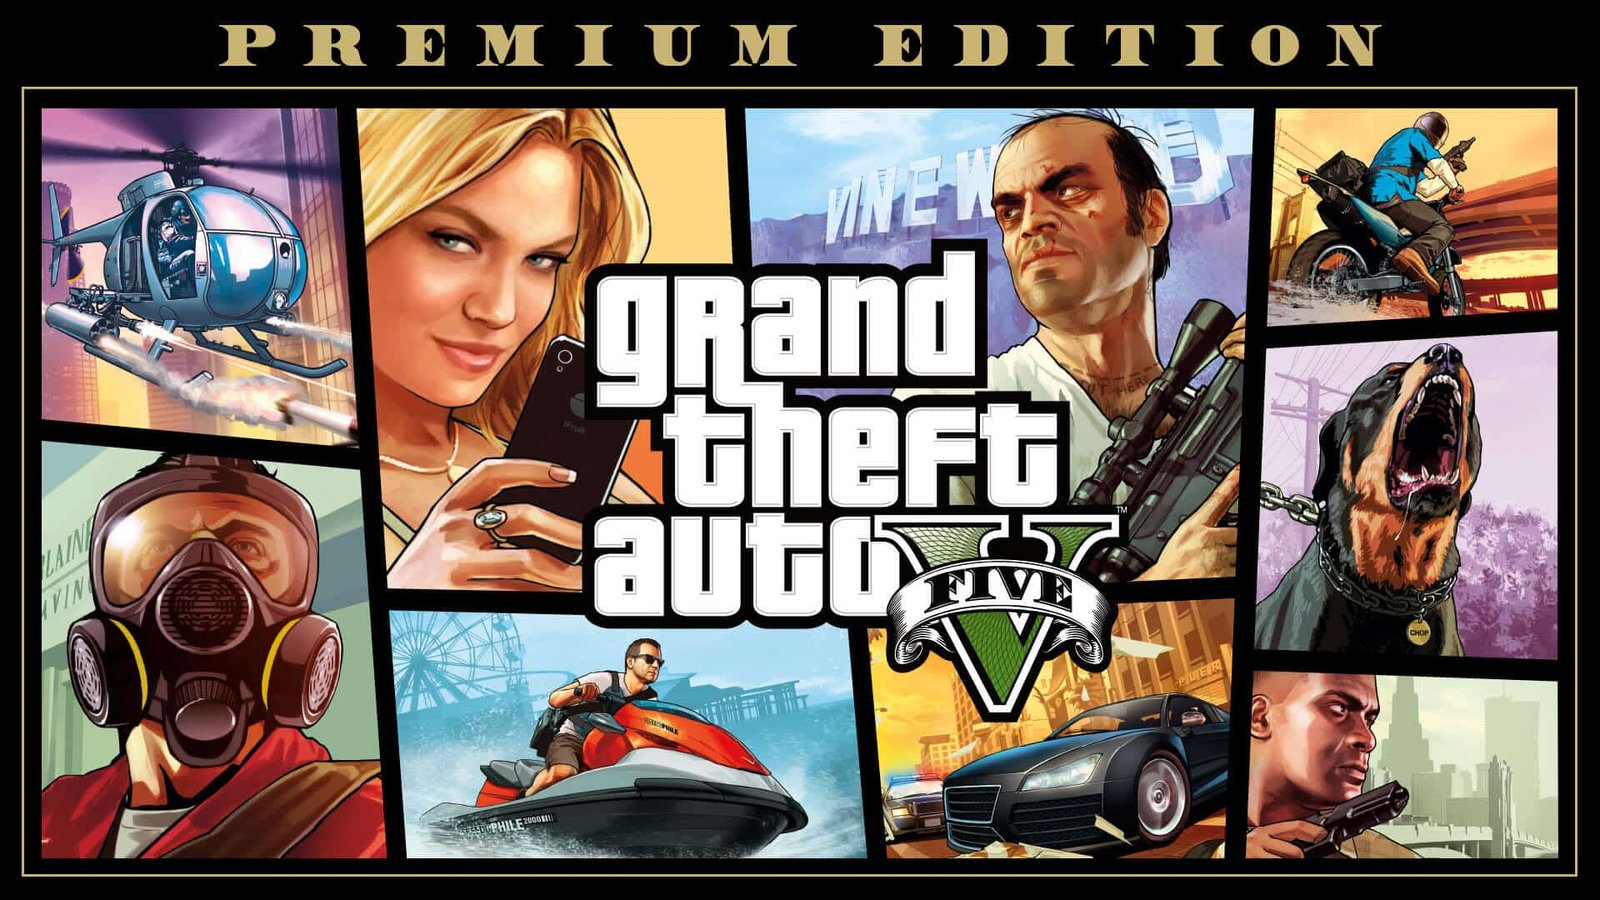 The latest DLC for Grand Theft Auto V Online, The Contract, featured Dr. Dre